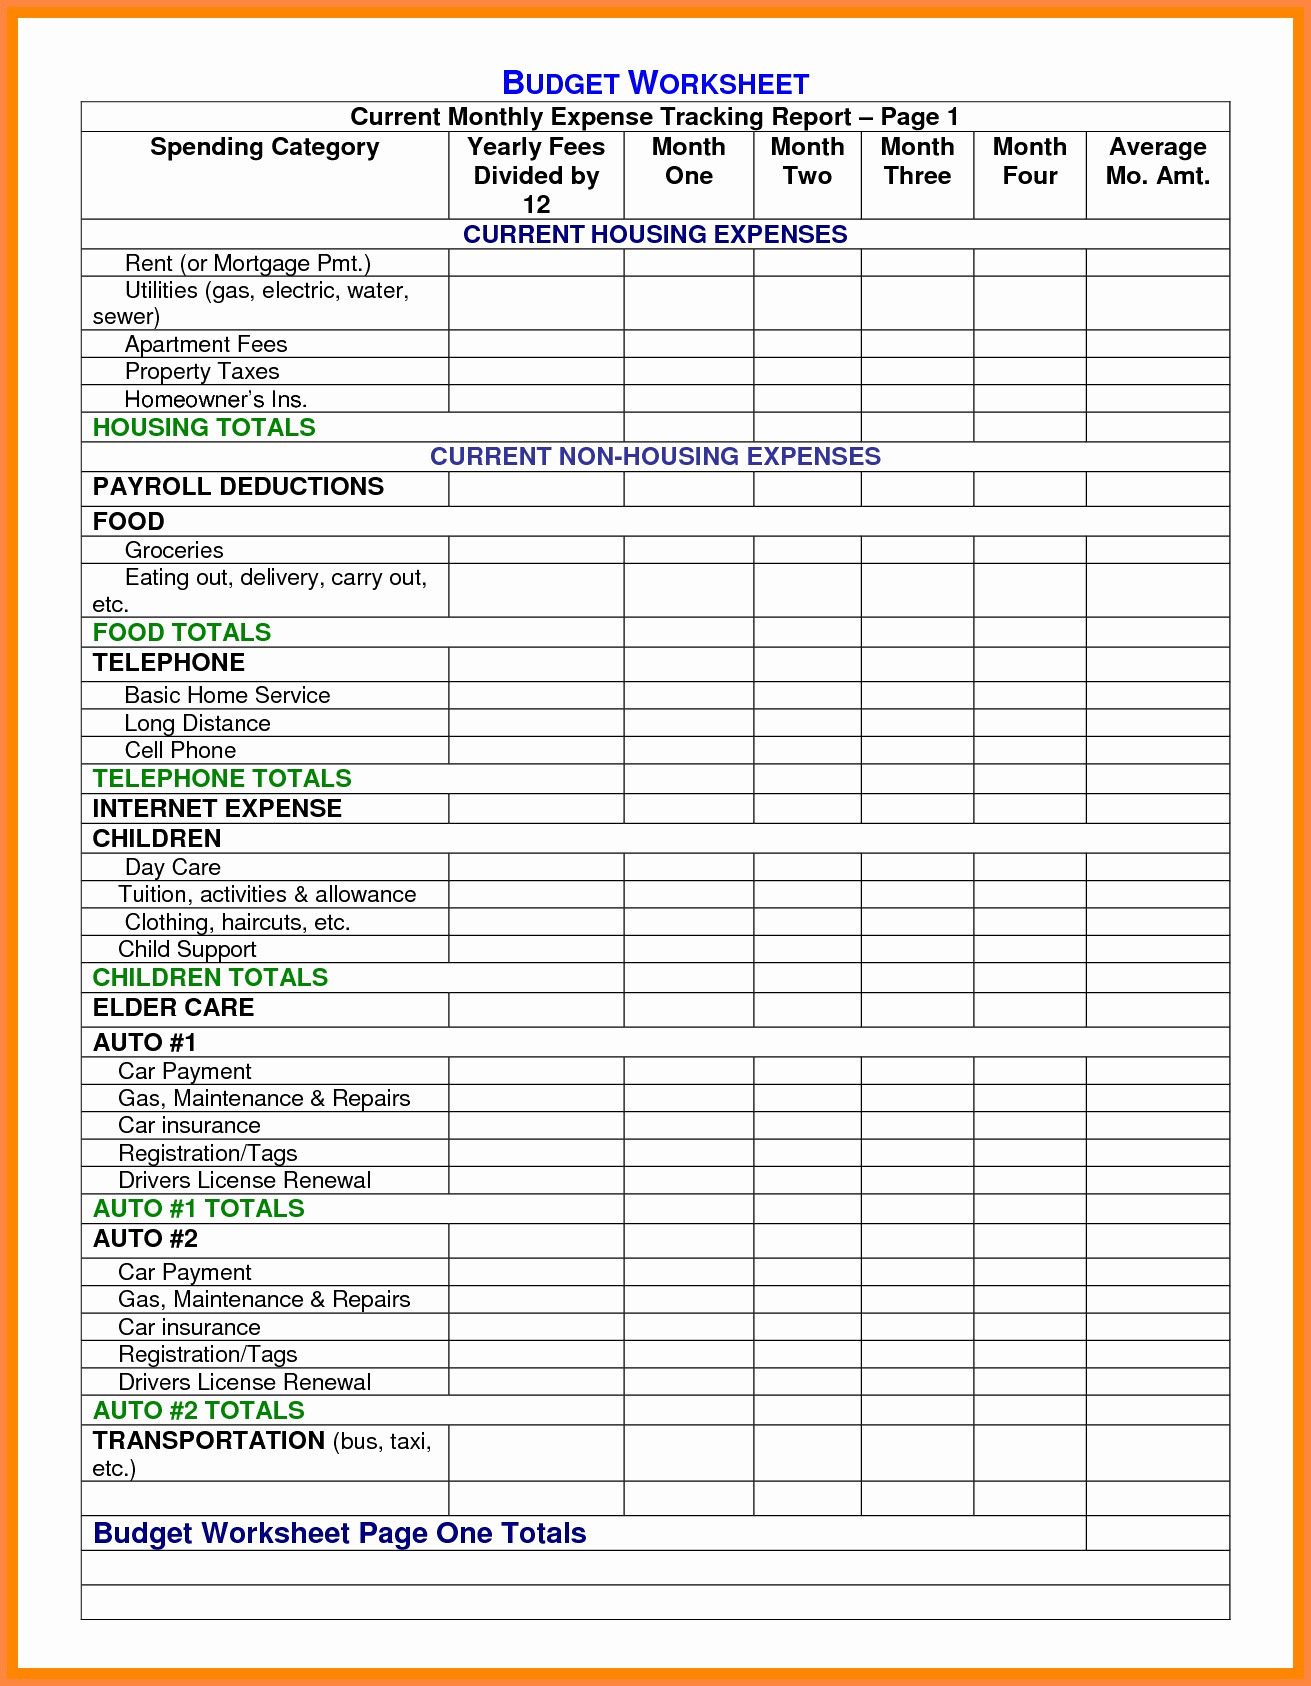 Material List For Building A House Spreadsheet Spreadsheet Downloa